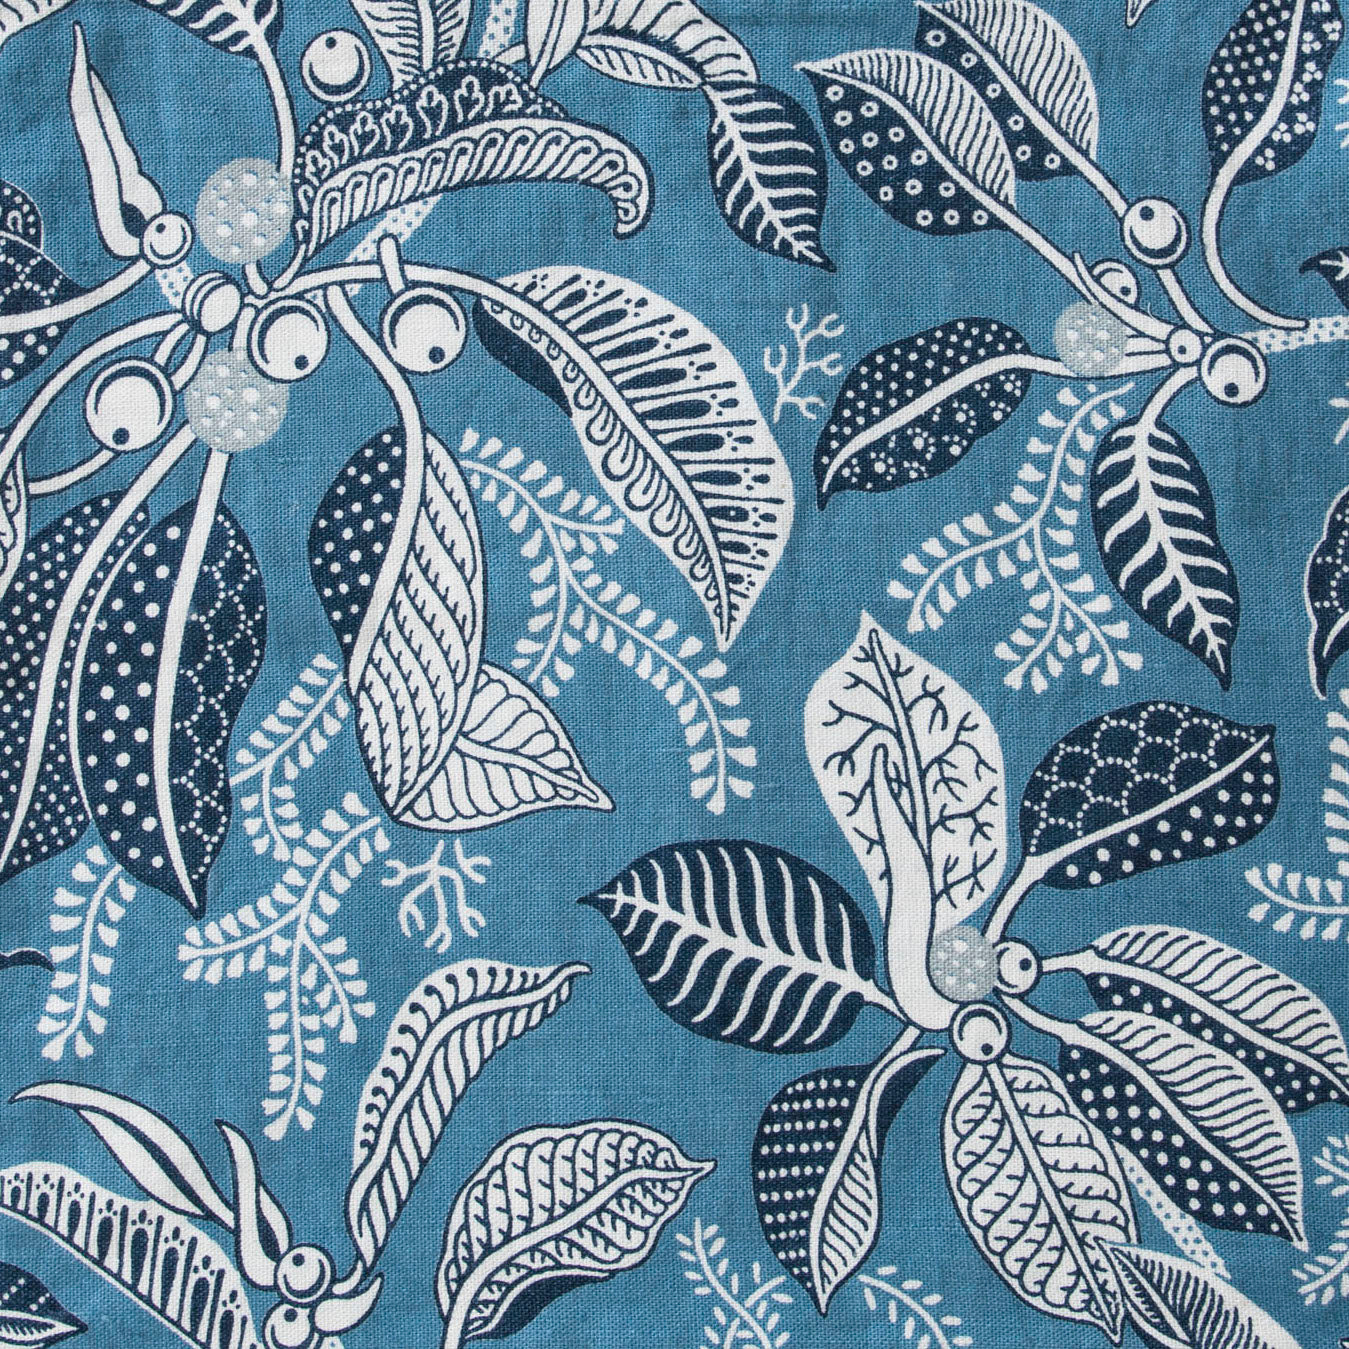 Draped fabric in a leaf and branch print in white and navy on a pacfic blue field.